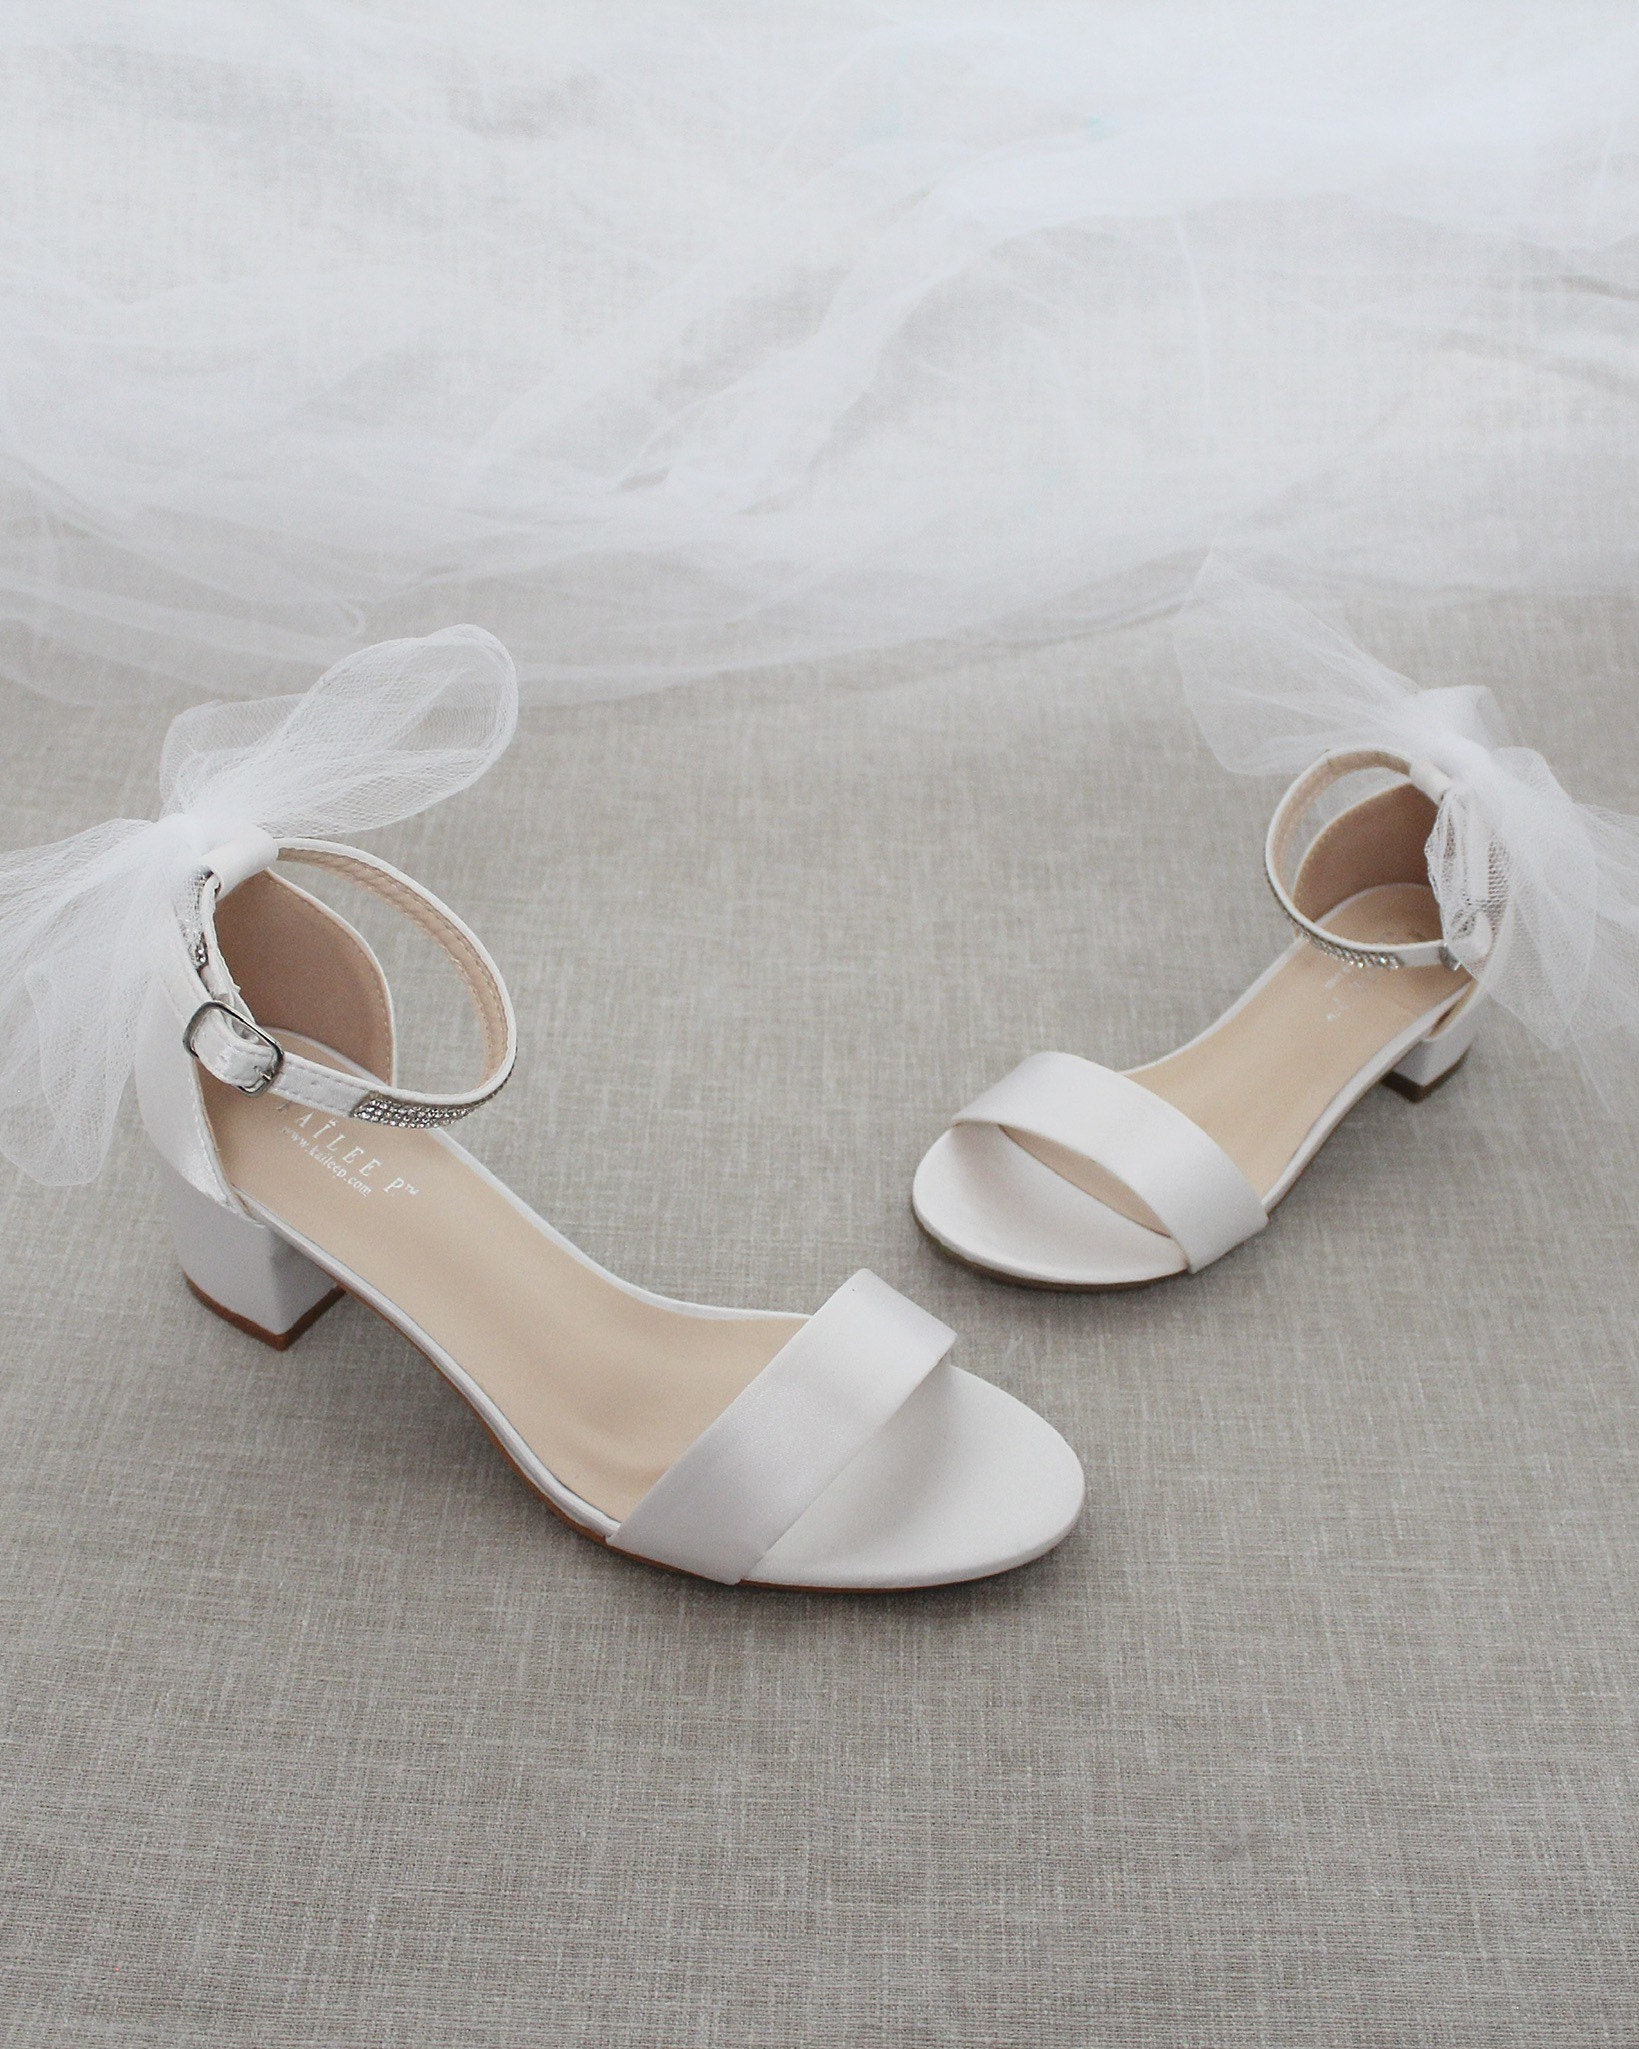 Luxury White Sexy Designer Wedding Shoes For Women Shoes Fashion Metal  Flower Thin High Heels Pointed Satin Comfortable Eden Shoes For Brides  Evening Party Prom From Crown2014, $51.26